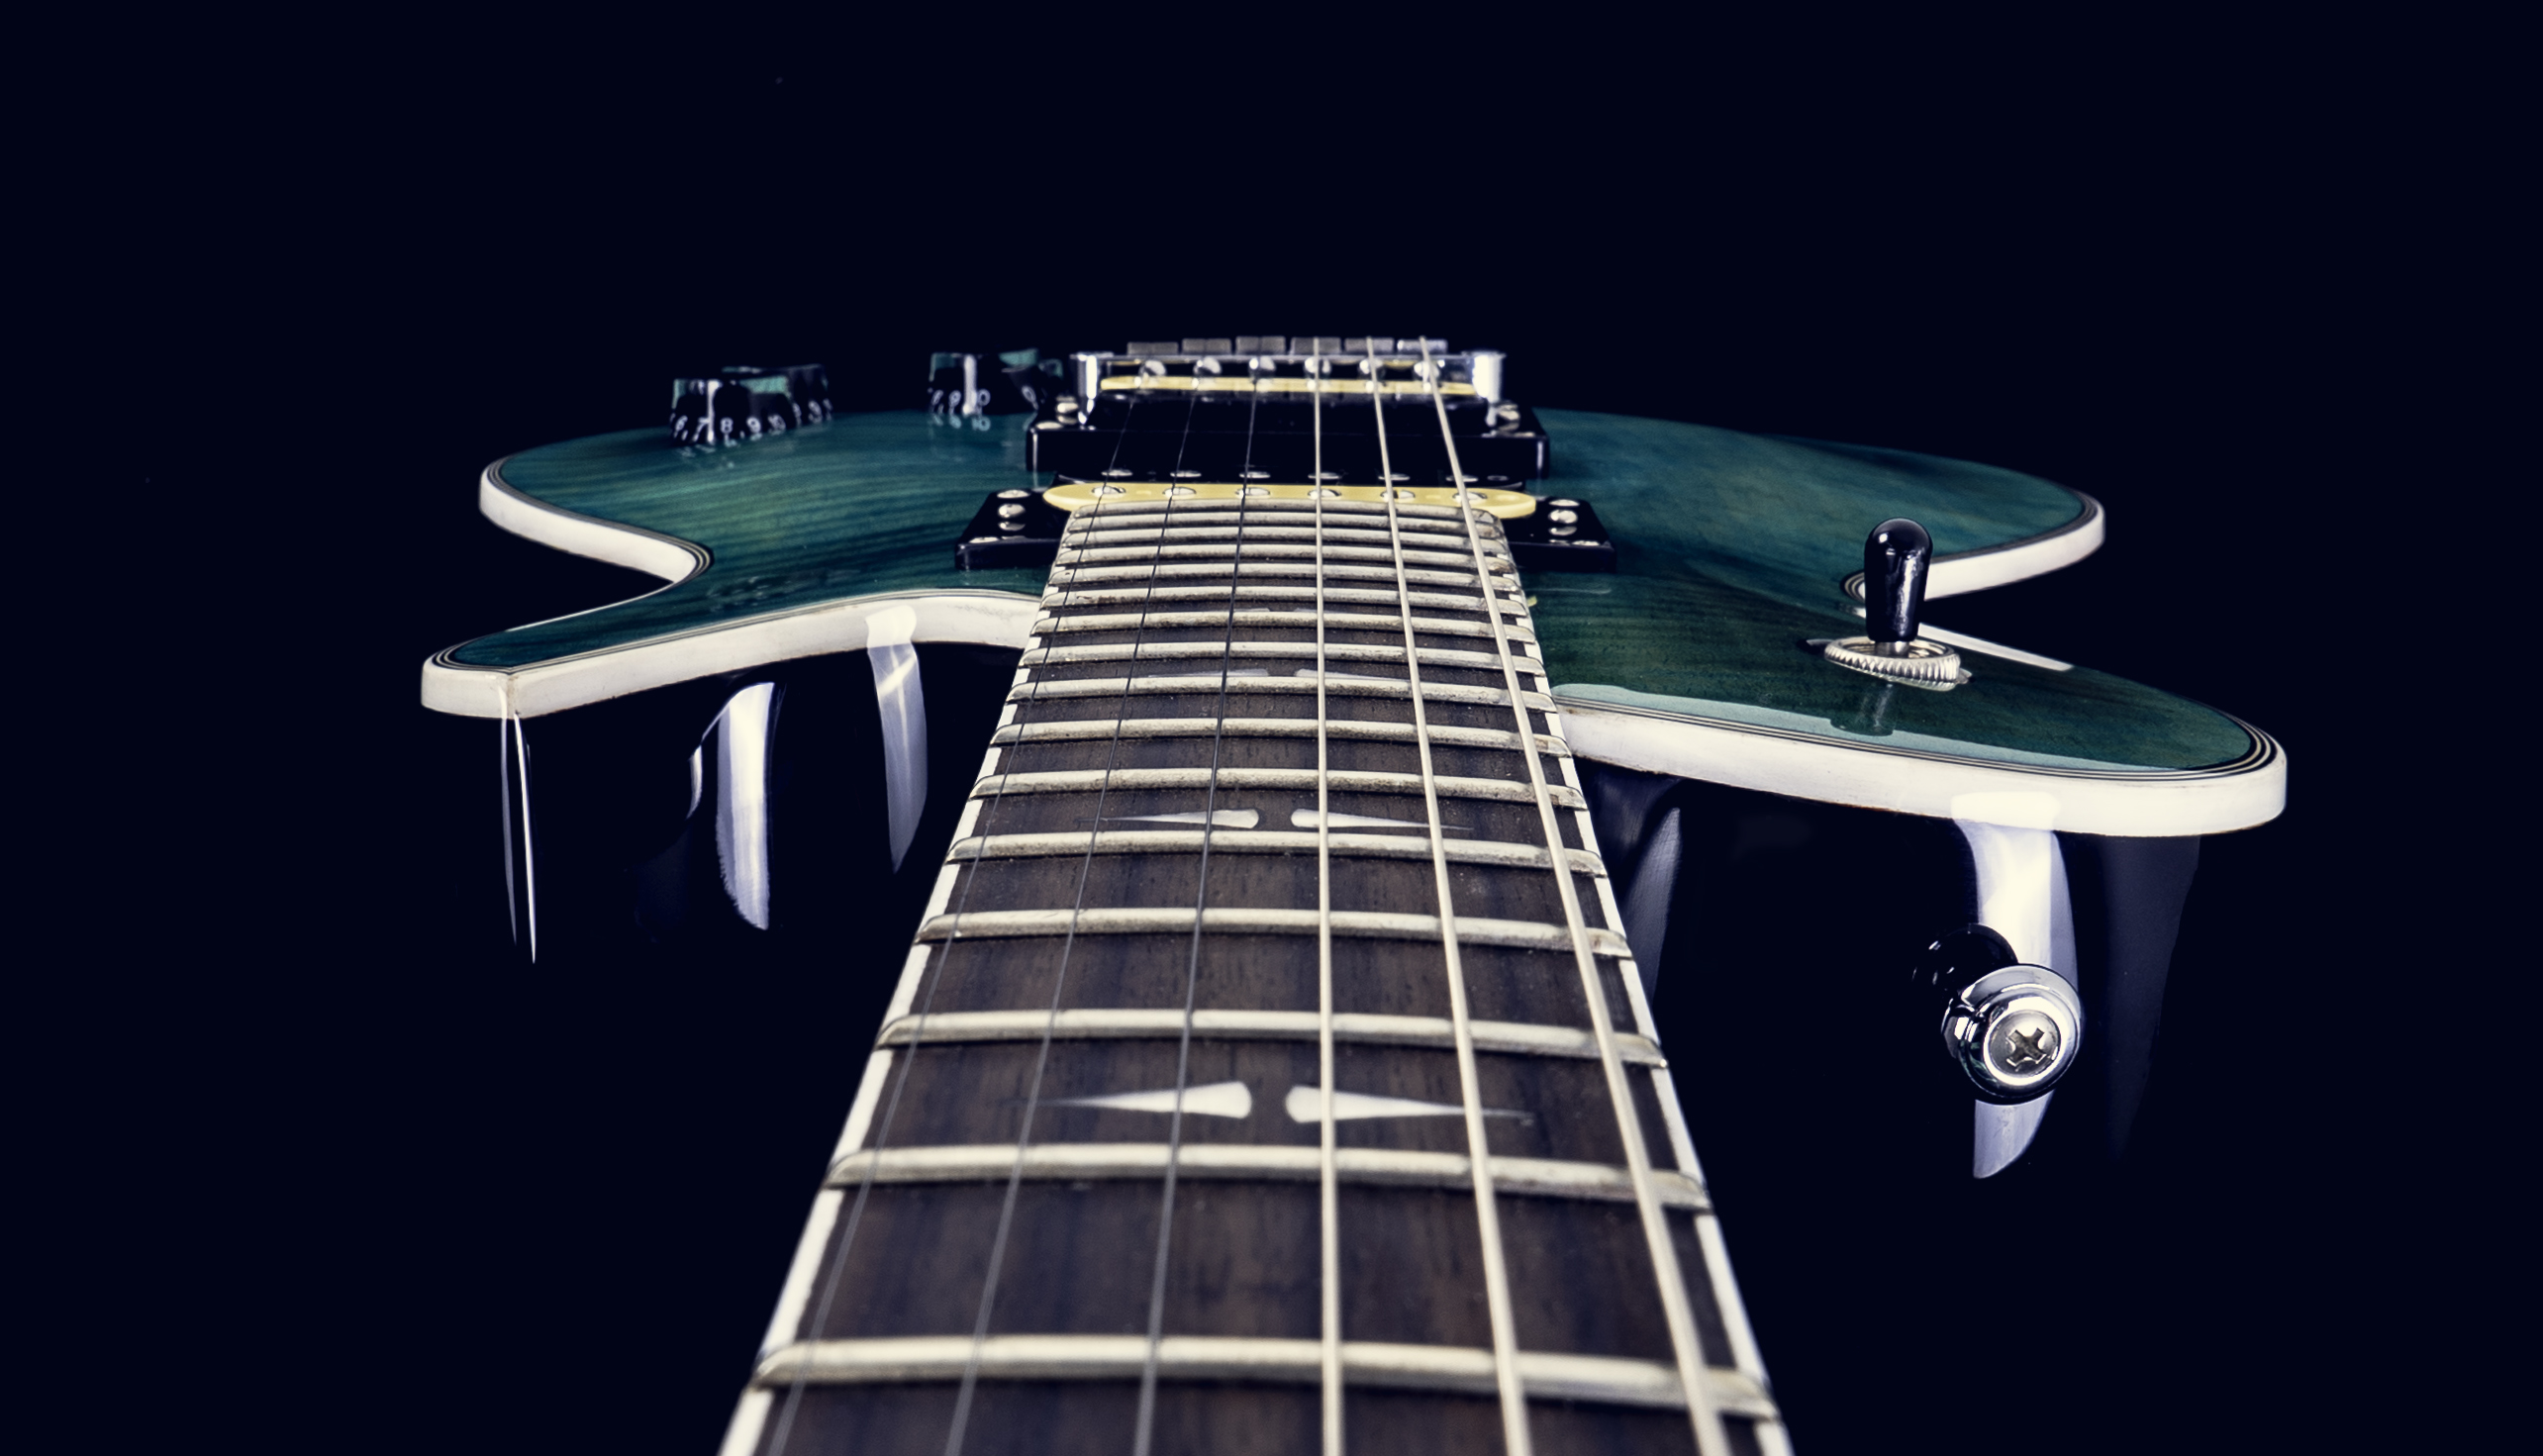 head-on view of electric guitar